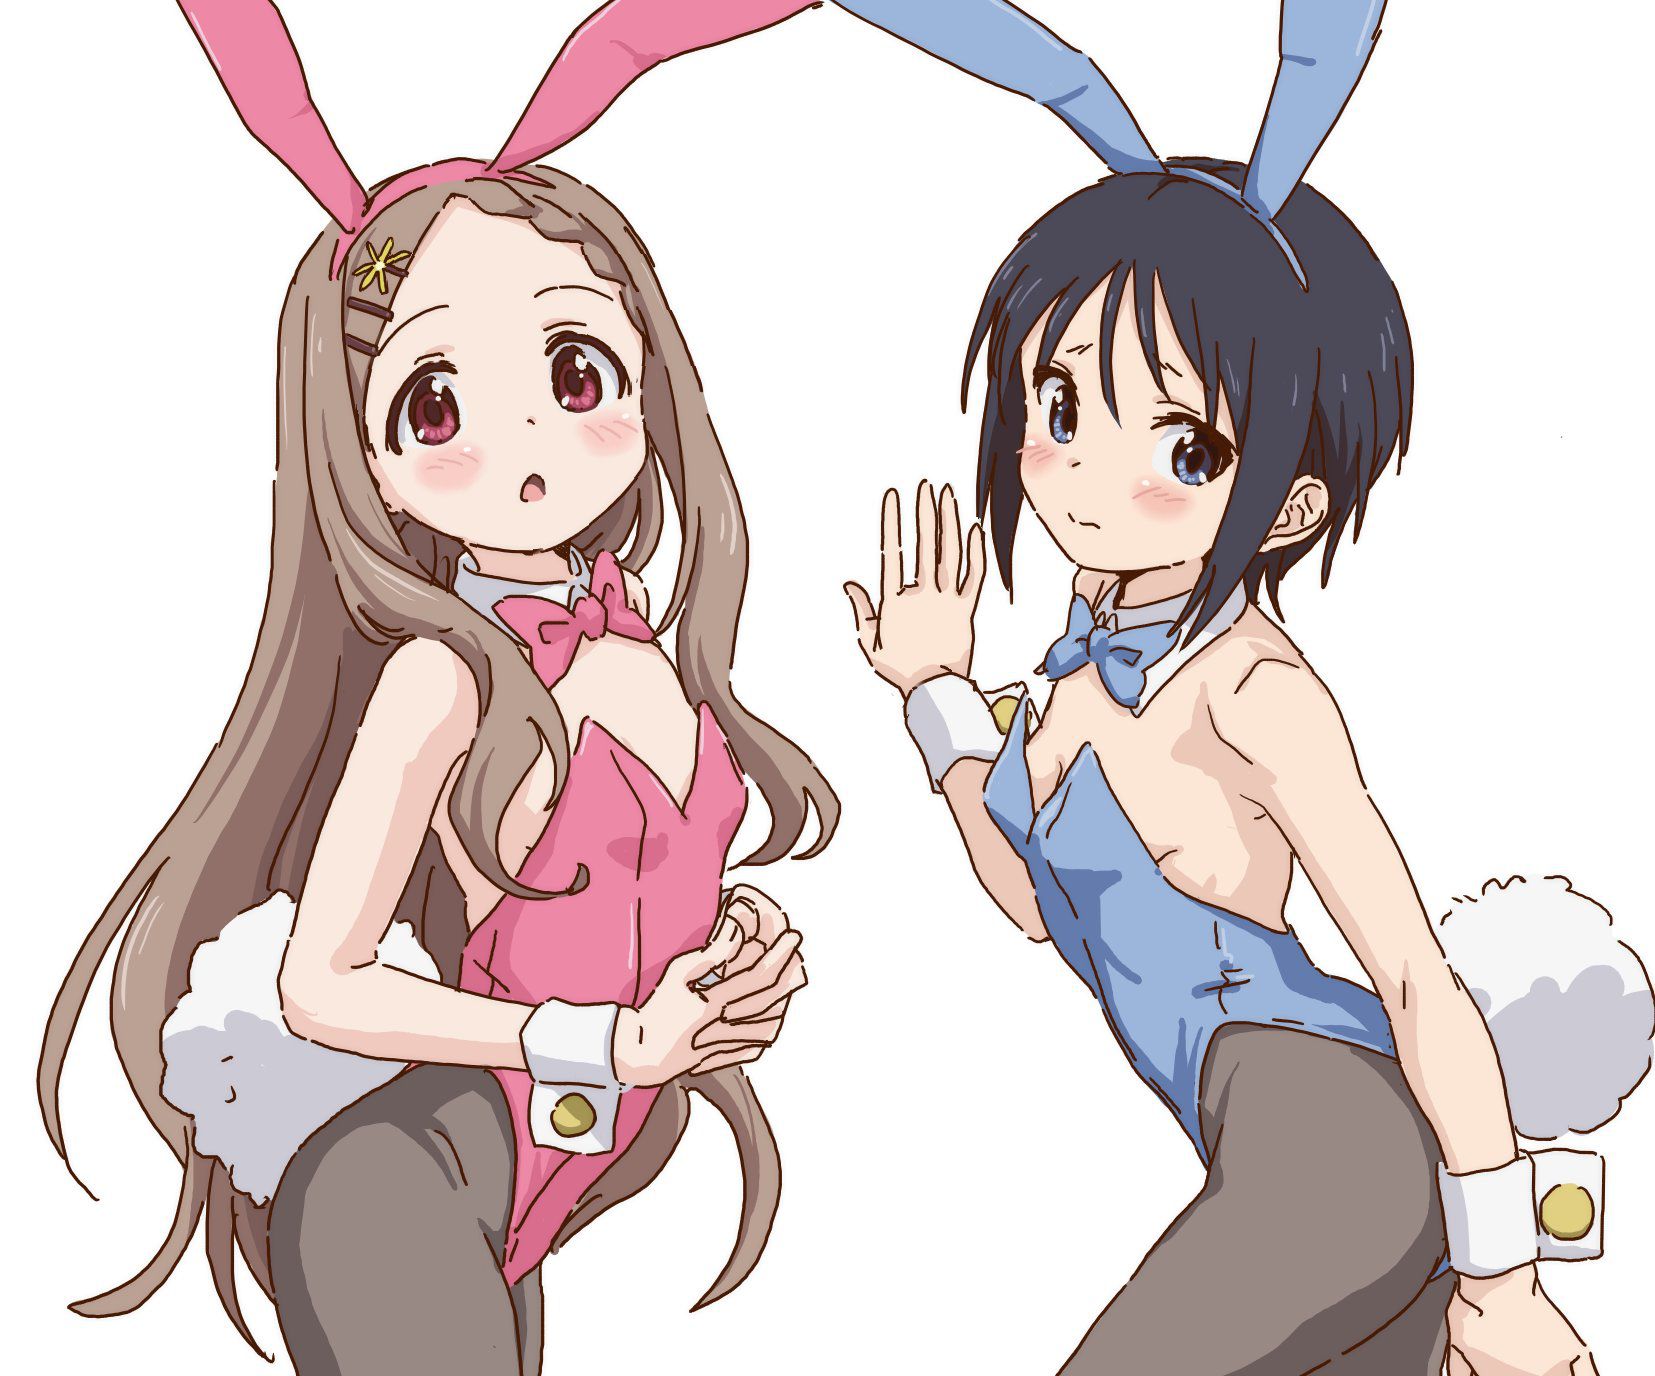 【Lori Bunny-chan】 Secondary erotic image that makes you want to see the moon with Usagi chan in the rabbit ear bunny girl of the secondary loli girl 25